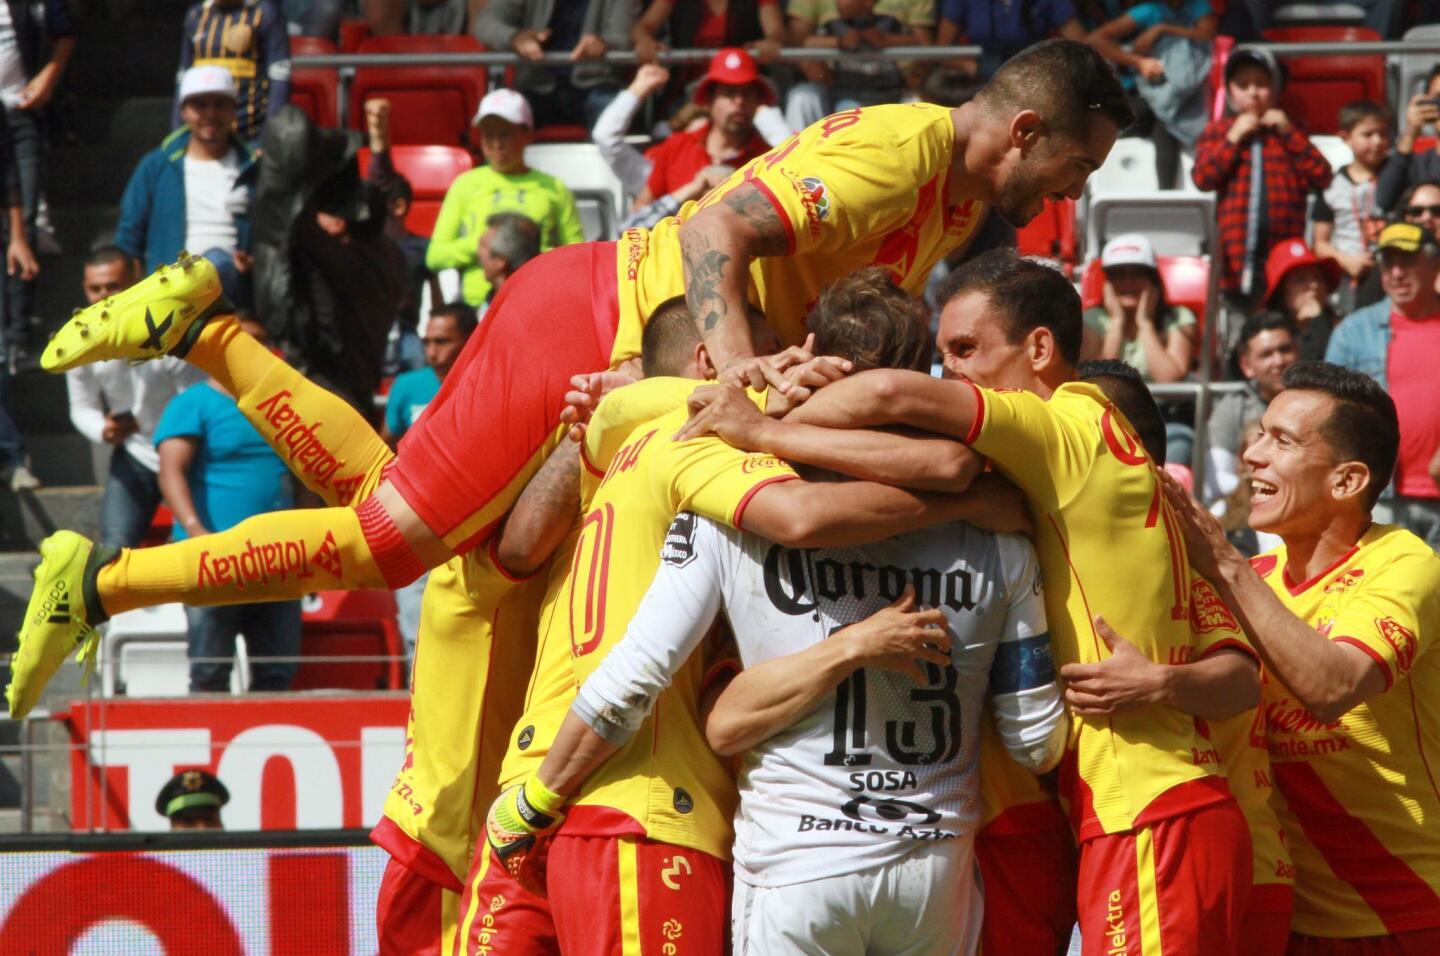 Morelia's goalkeeper Uruguayan Sebastian Sosa (C) celebrates with teammates after stopping a penalty to Toluca during their Mexican Apertura football tournament match at the Nemesio Diez stadium in Toluca, Mexico, on October 29, 2017. / AFP PHOTO / ROCIO VAZQUEZROCIO VAZQUEZ/AFP/Getty Images ** OUTS - ELSENT, FPG, CM - OUTS * NM, PH, VA if sourced by CT, LA or MoD **